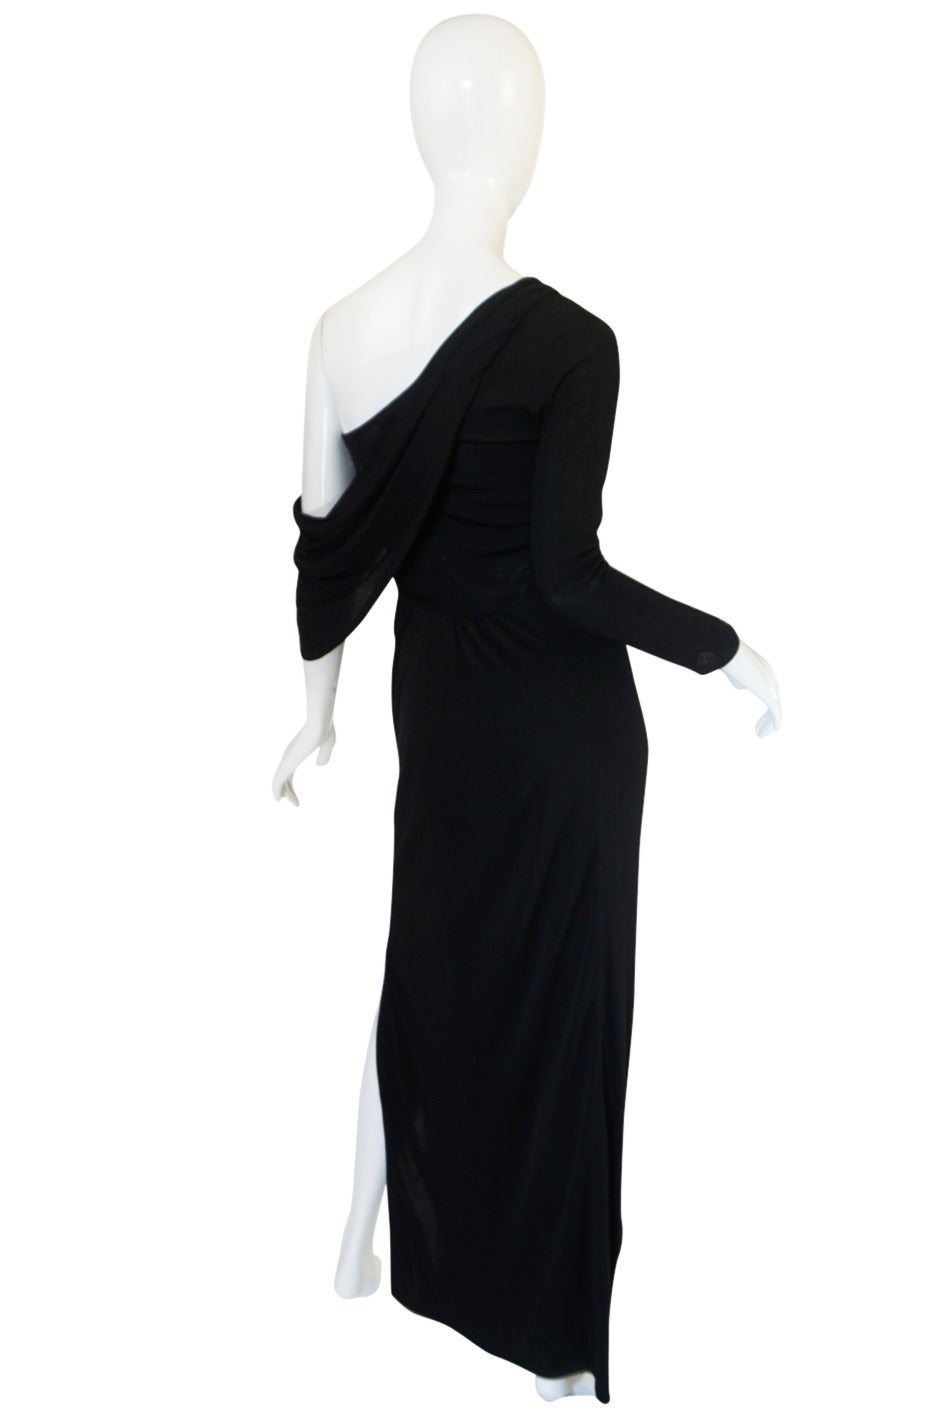 John Anthony opened his label in 1971 and during the seventies produced amazing pieces that were sleek and sexy. This particular dress from the late seventies is genius. The soft draped detail on the bust is hand placed and set to soften the fitted